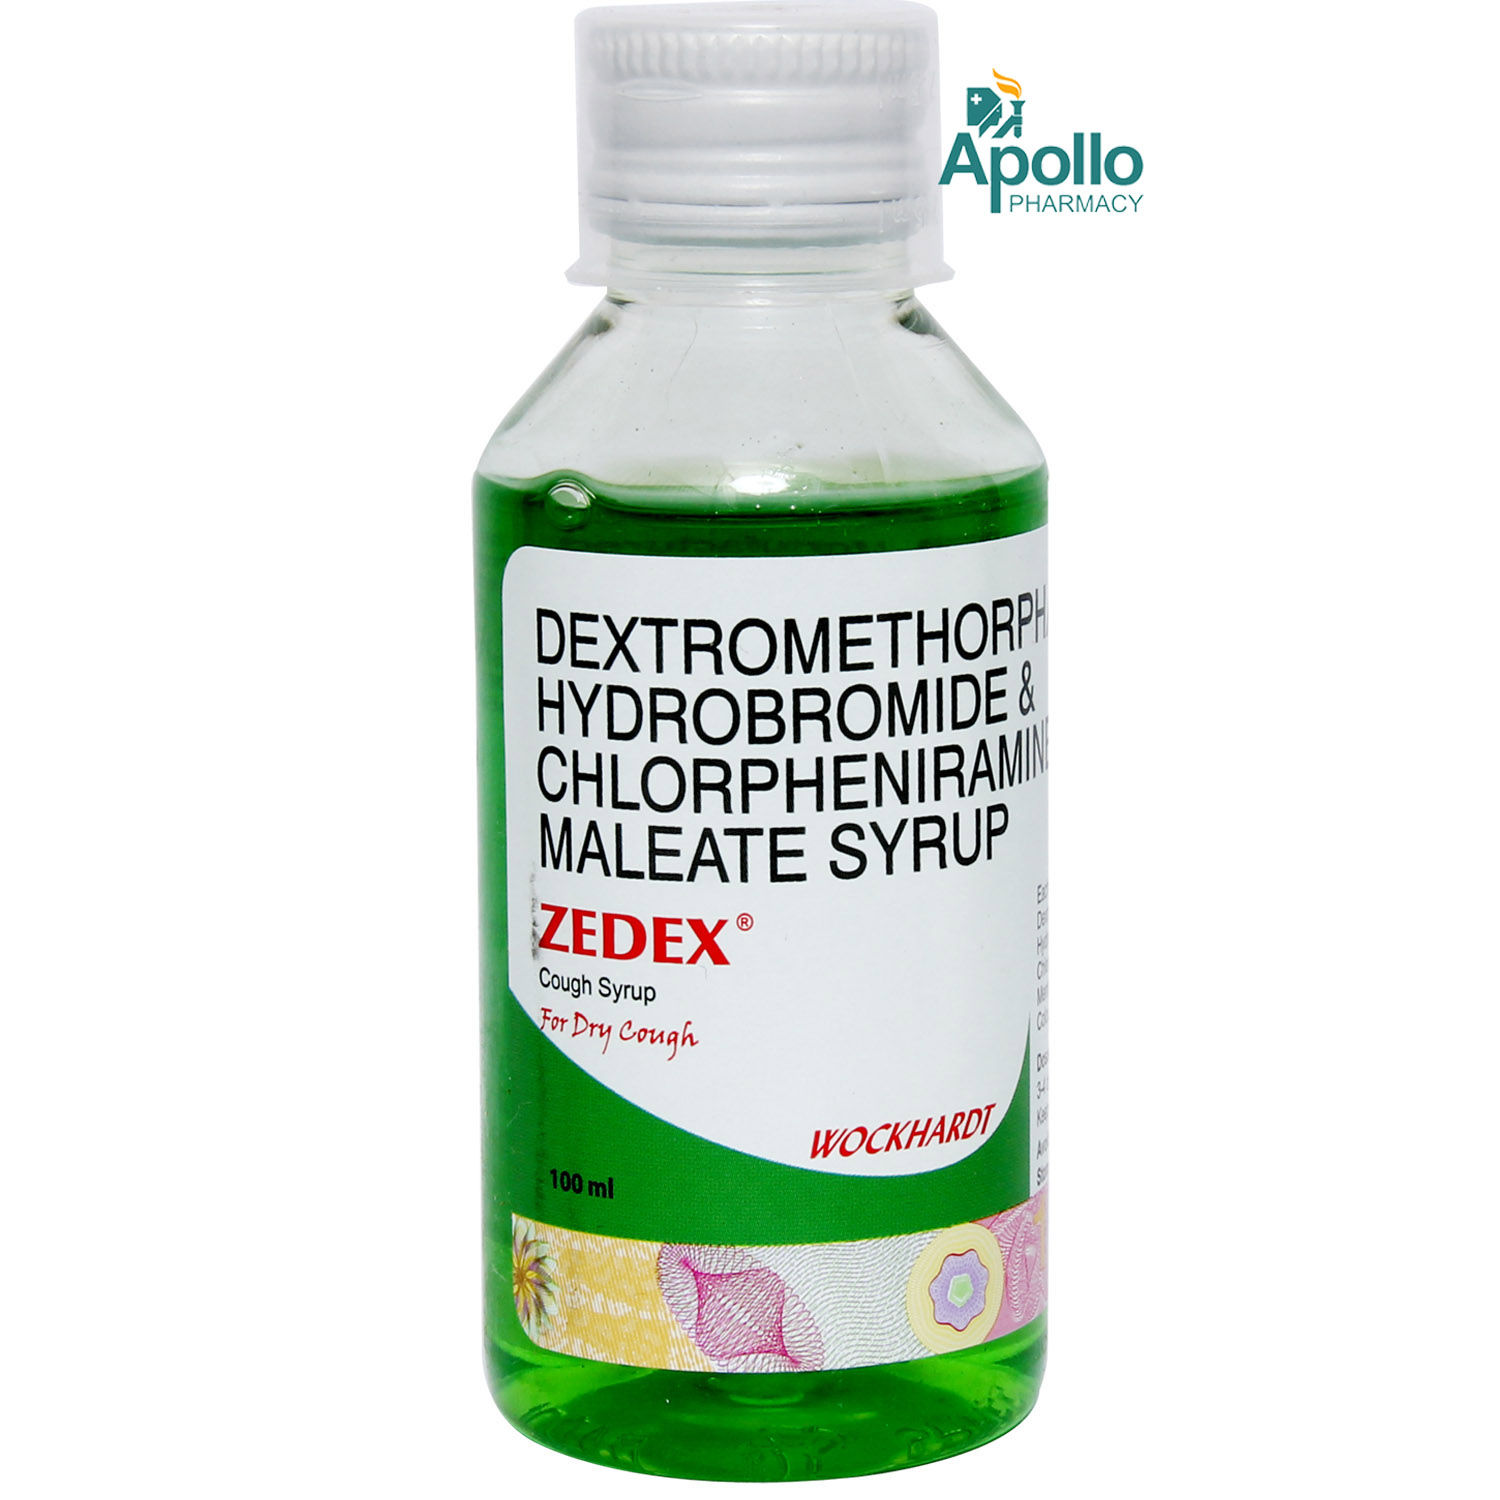 Zedex Cough Syrup | Uses, Side Effects, Price | Apollo Pharmacy